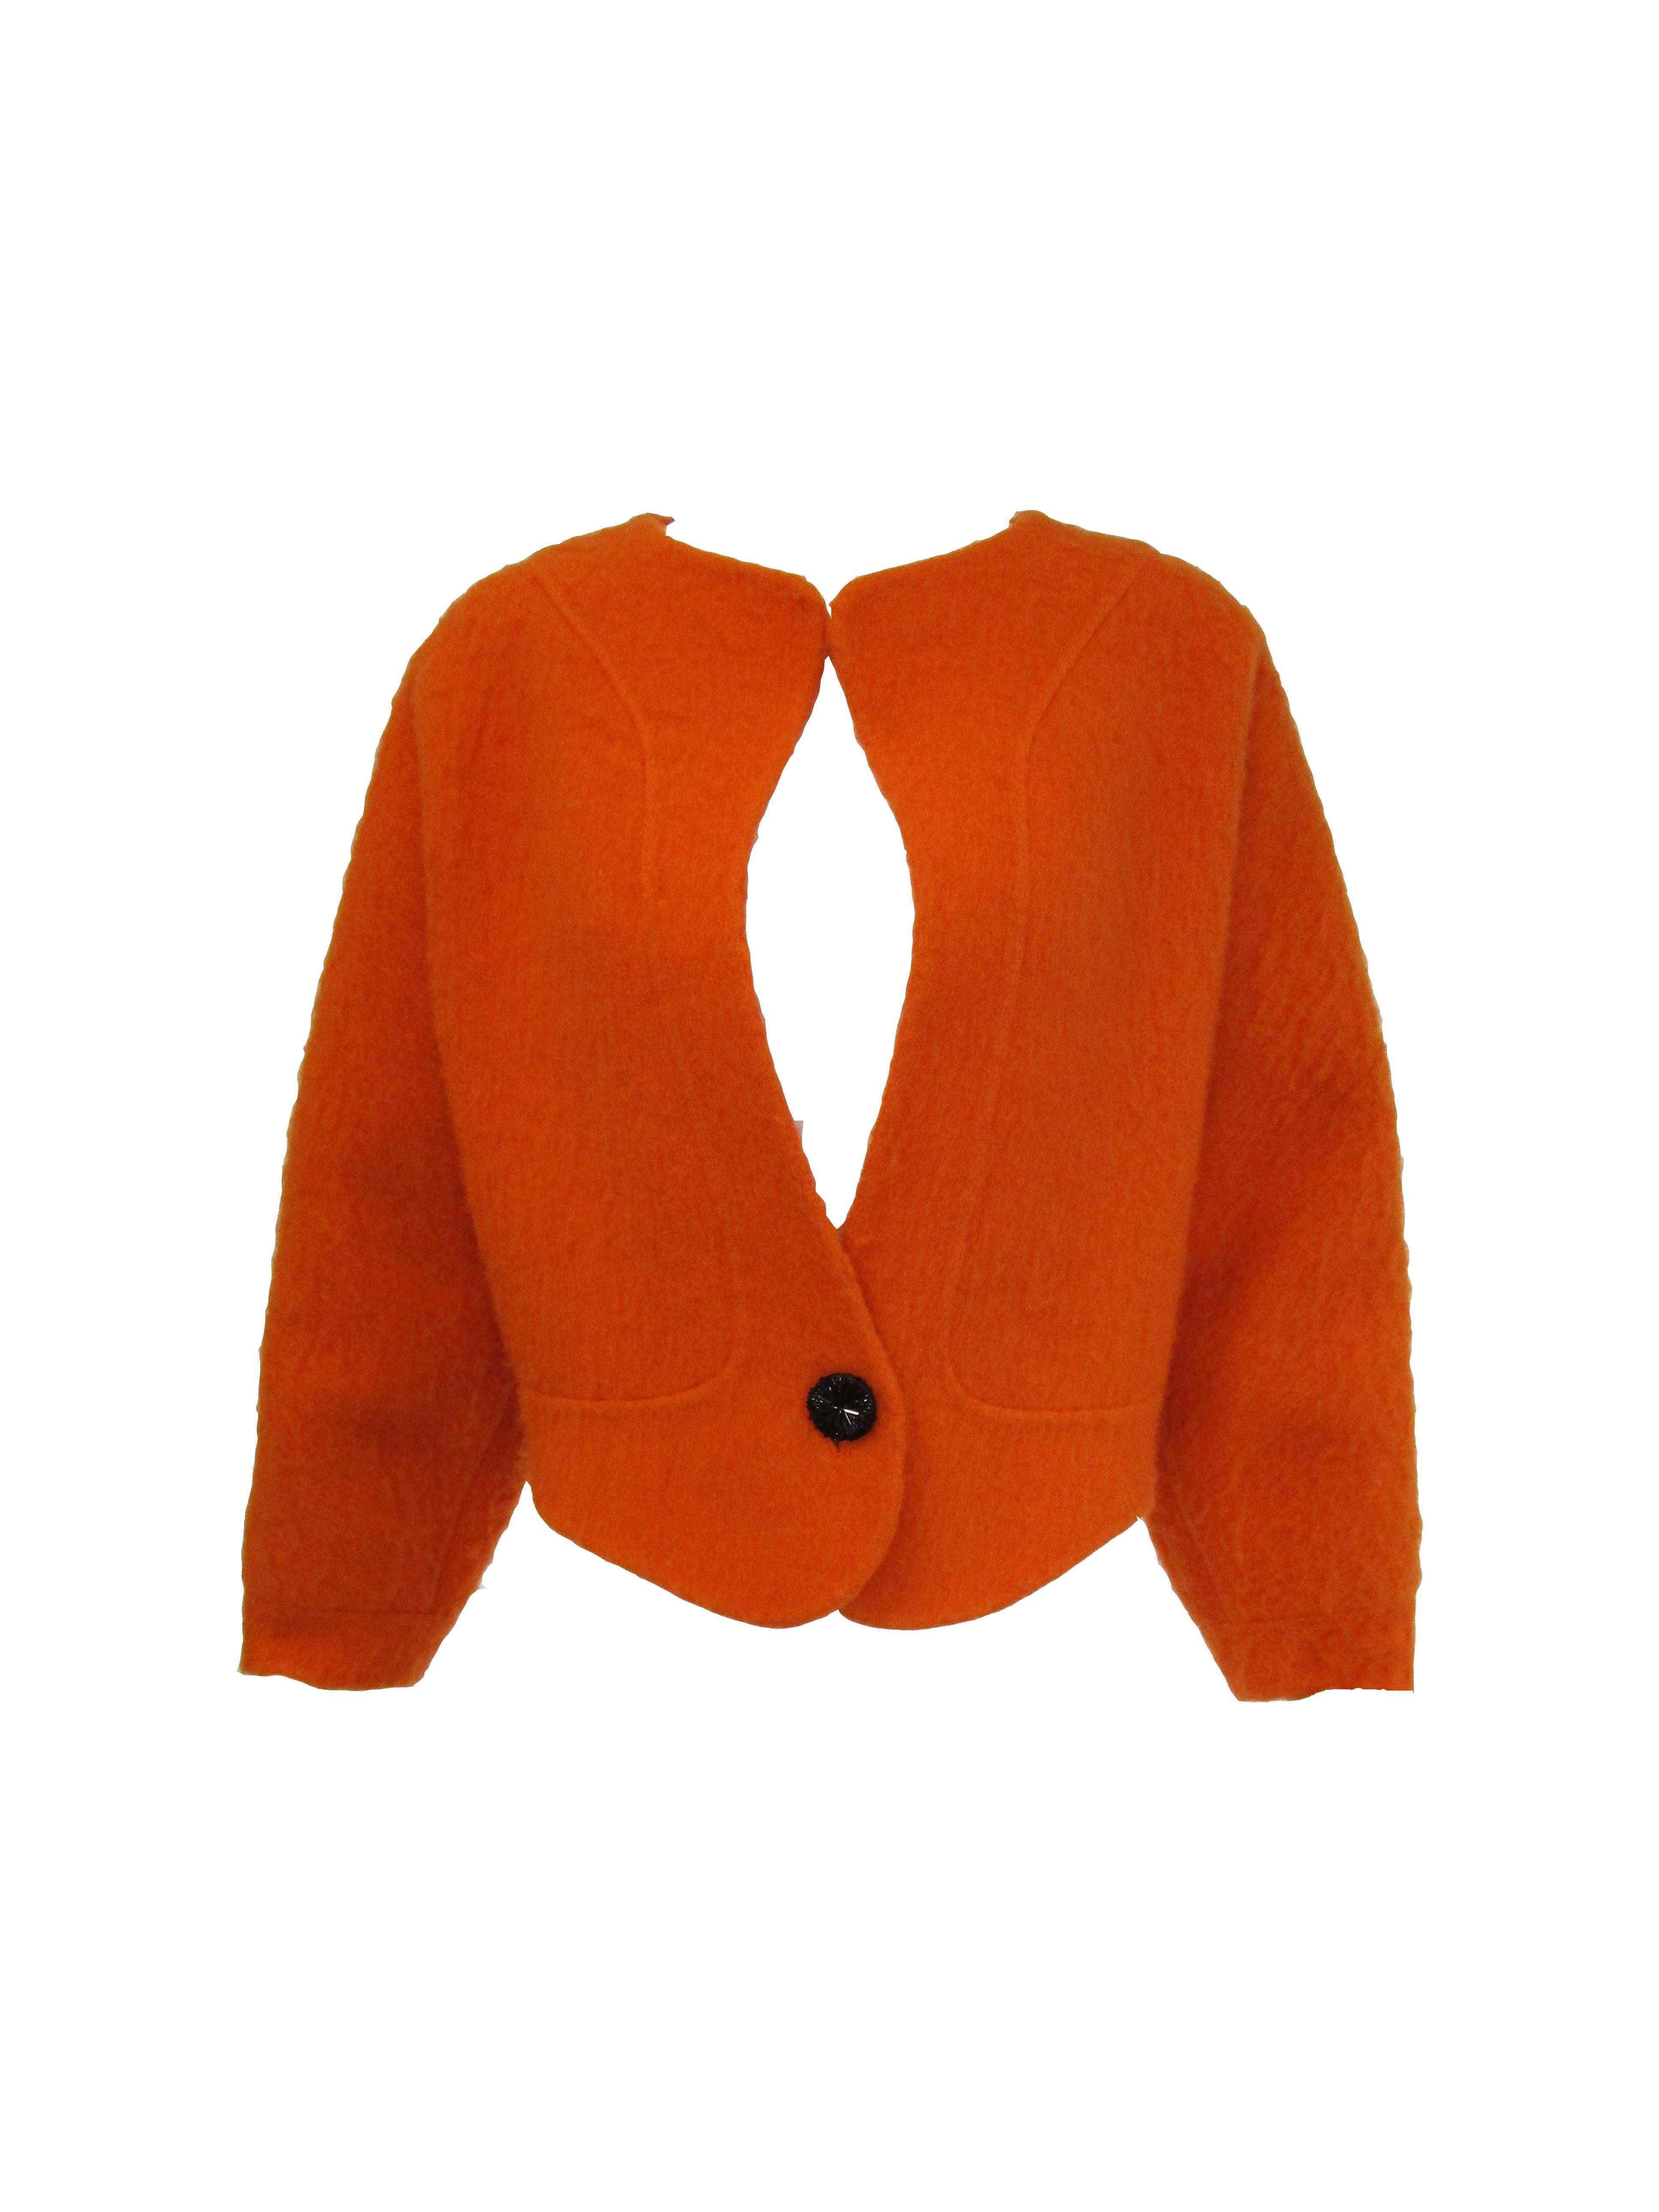 Red  1990s Geoffery Beene Bright Orange Mohair Jacket - Cropped  For Sale